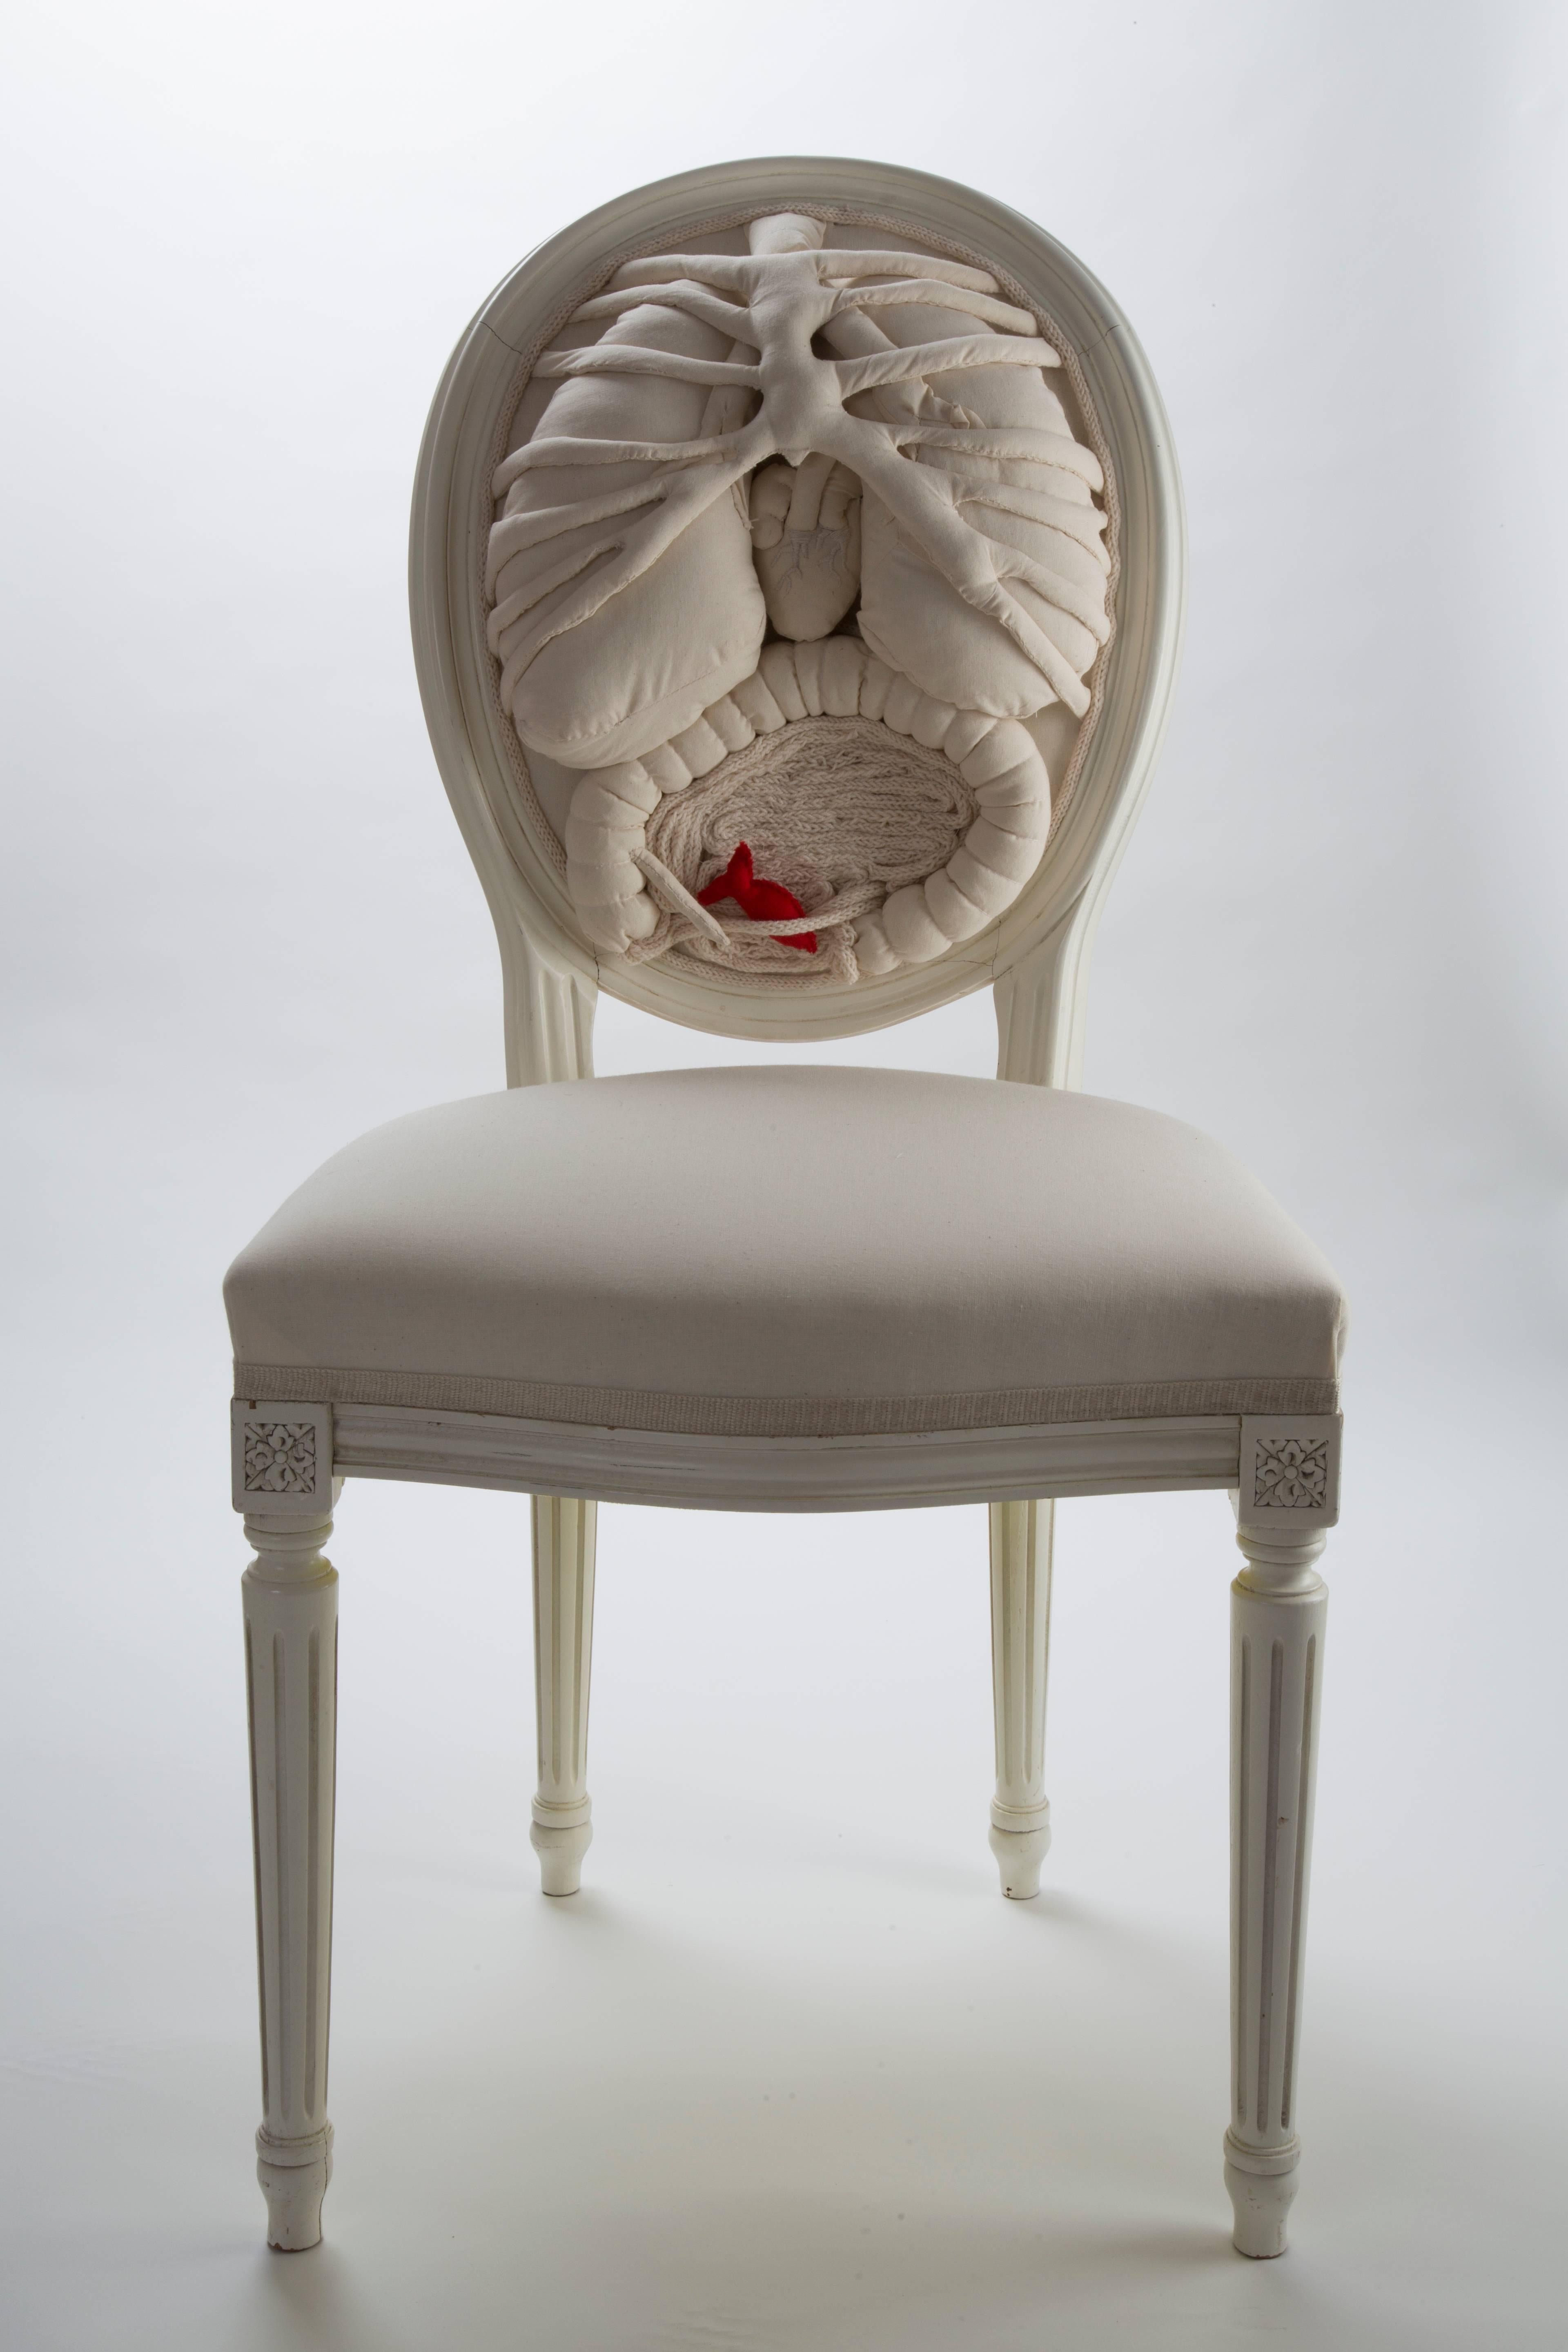 Incredible one of a kind white chair
by French artist.
Handmade embroidered in a white Louis XVI style chair in beechwood.
These art pieces have plenty of poetry, hidden messages and creativity. 



Dimensions:

Height 96 cm
Width 50